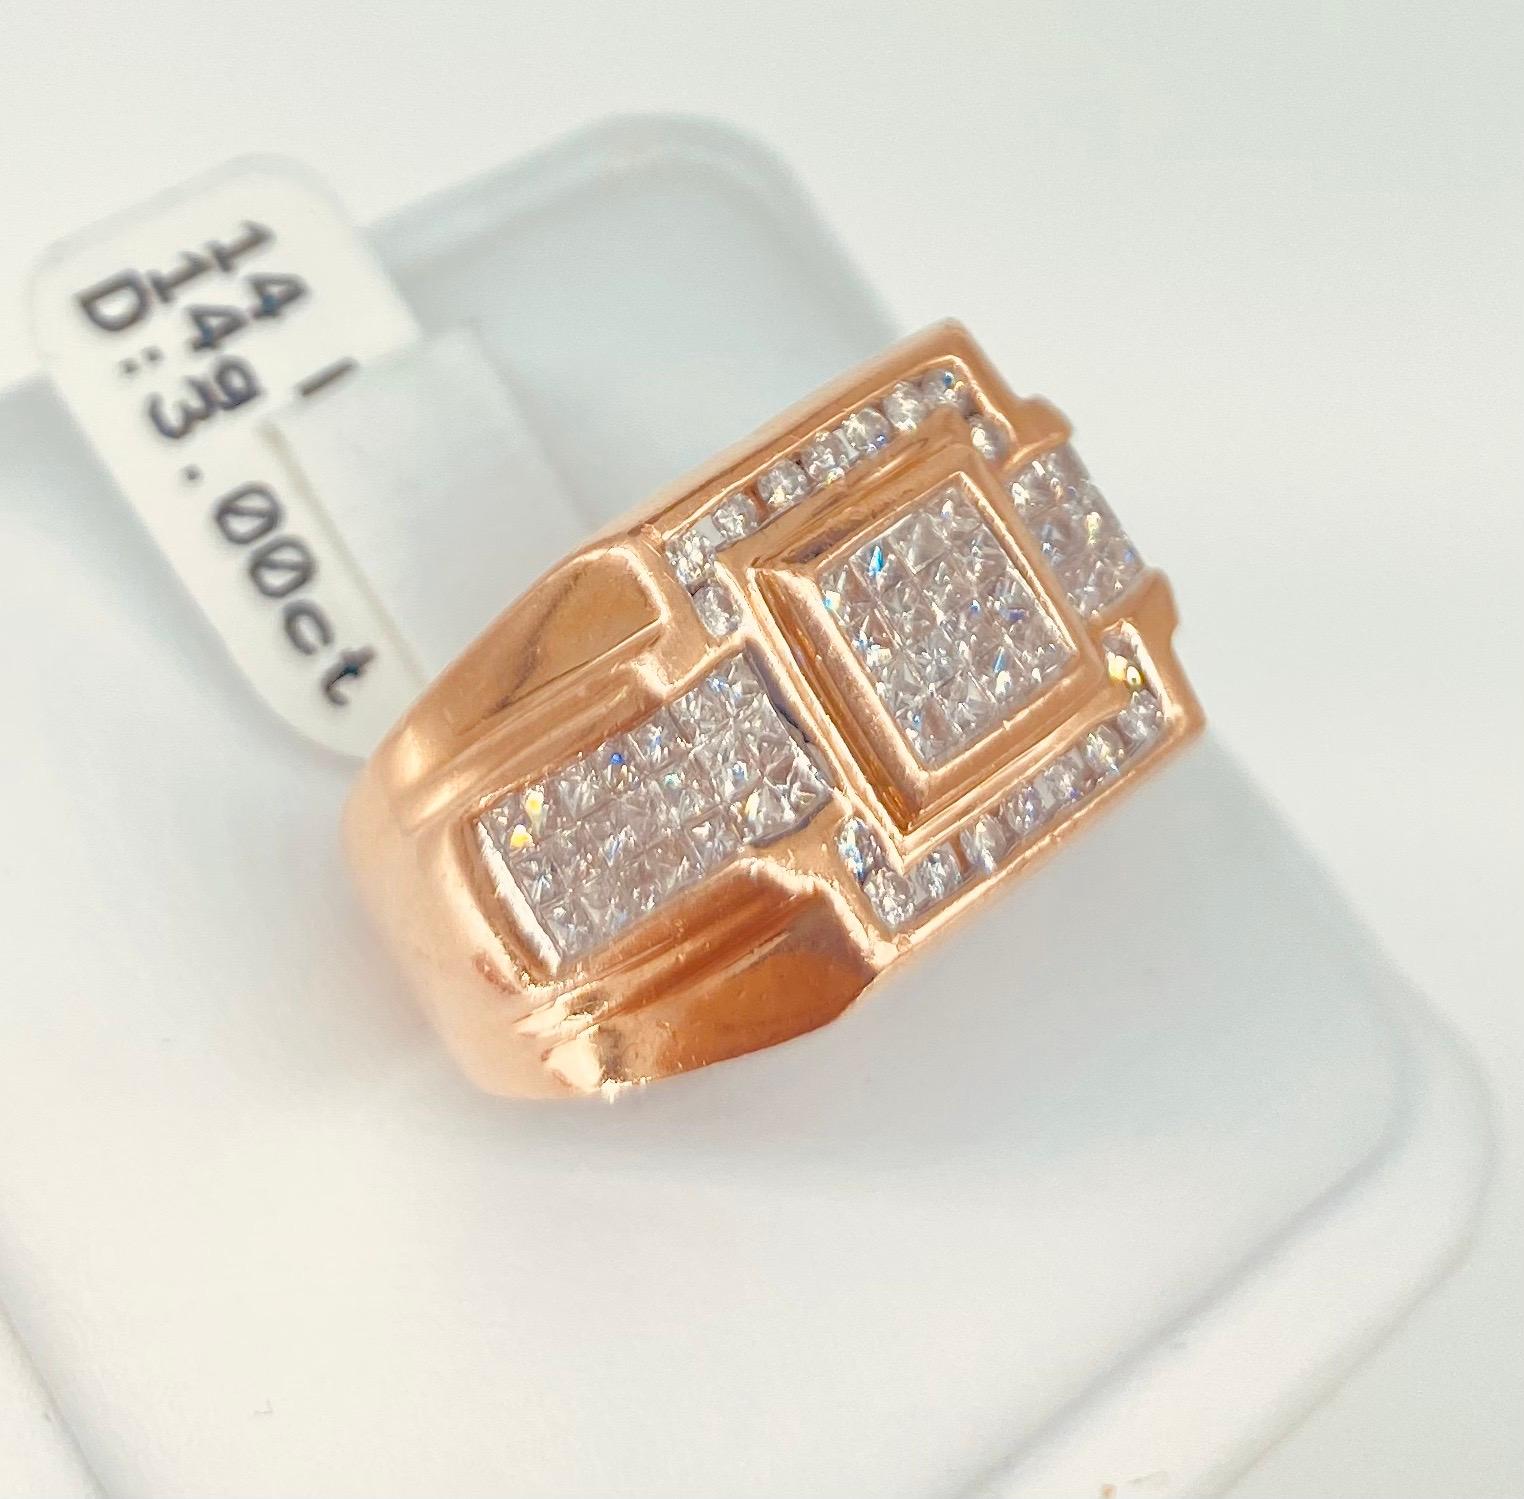 Men’s 3.00 Carat Diamonds Rose Gold Ring
Size: 8.5
Measures 14mm height
Diamonds total weight approx 3.00 carats 
There are princess cut diamonds as well as round diamonds throughout the ring.
Weights 14 grams Rose gold 14 karat
